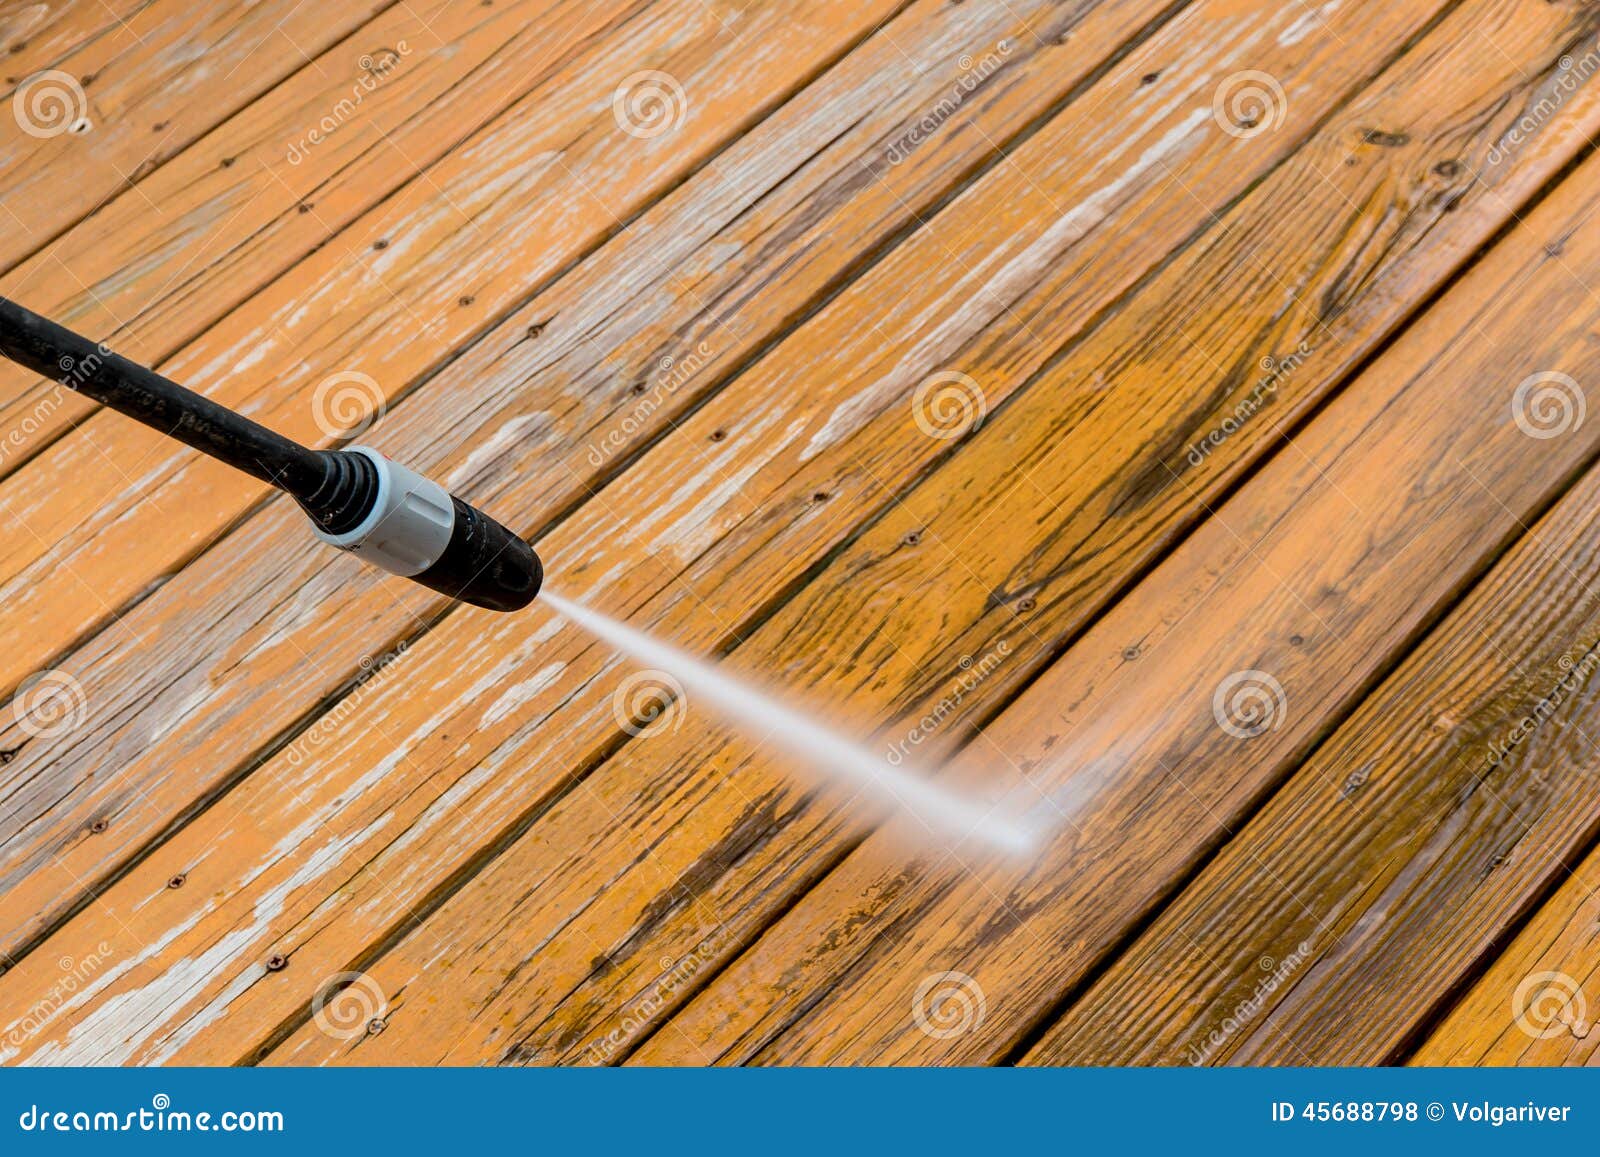 wooden deck floor cleaning with high pressure water jet.